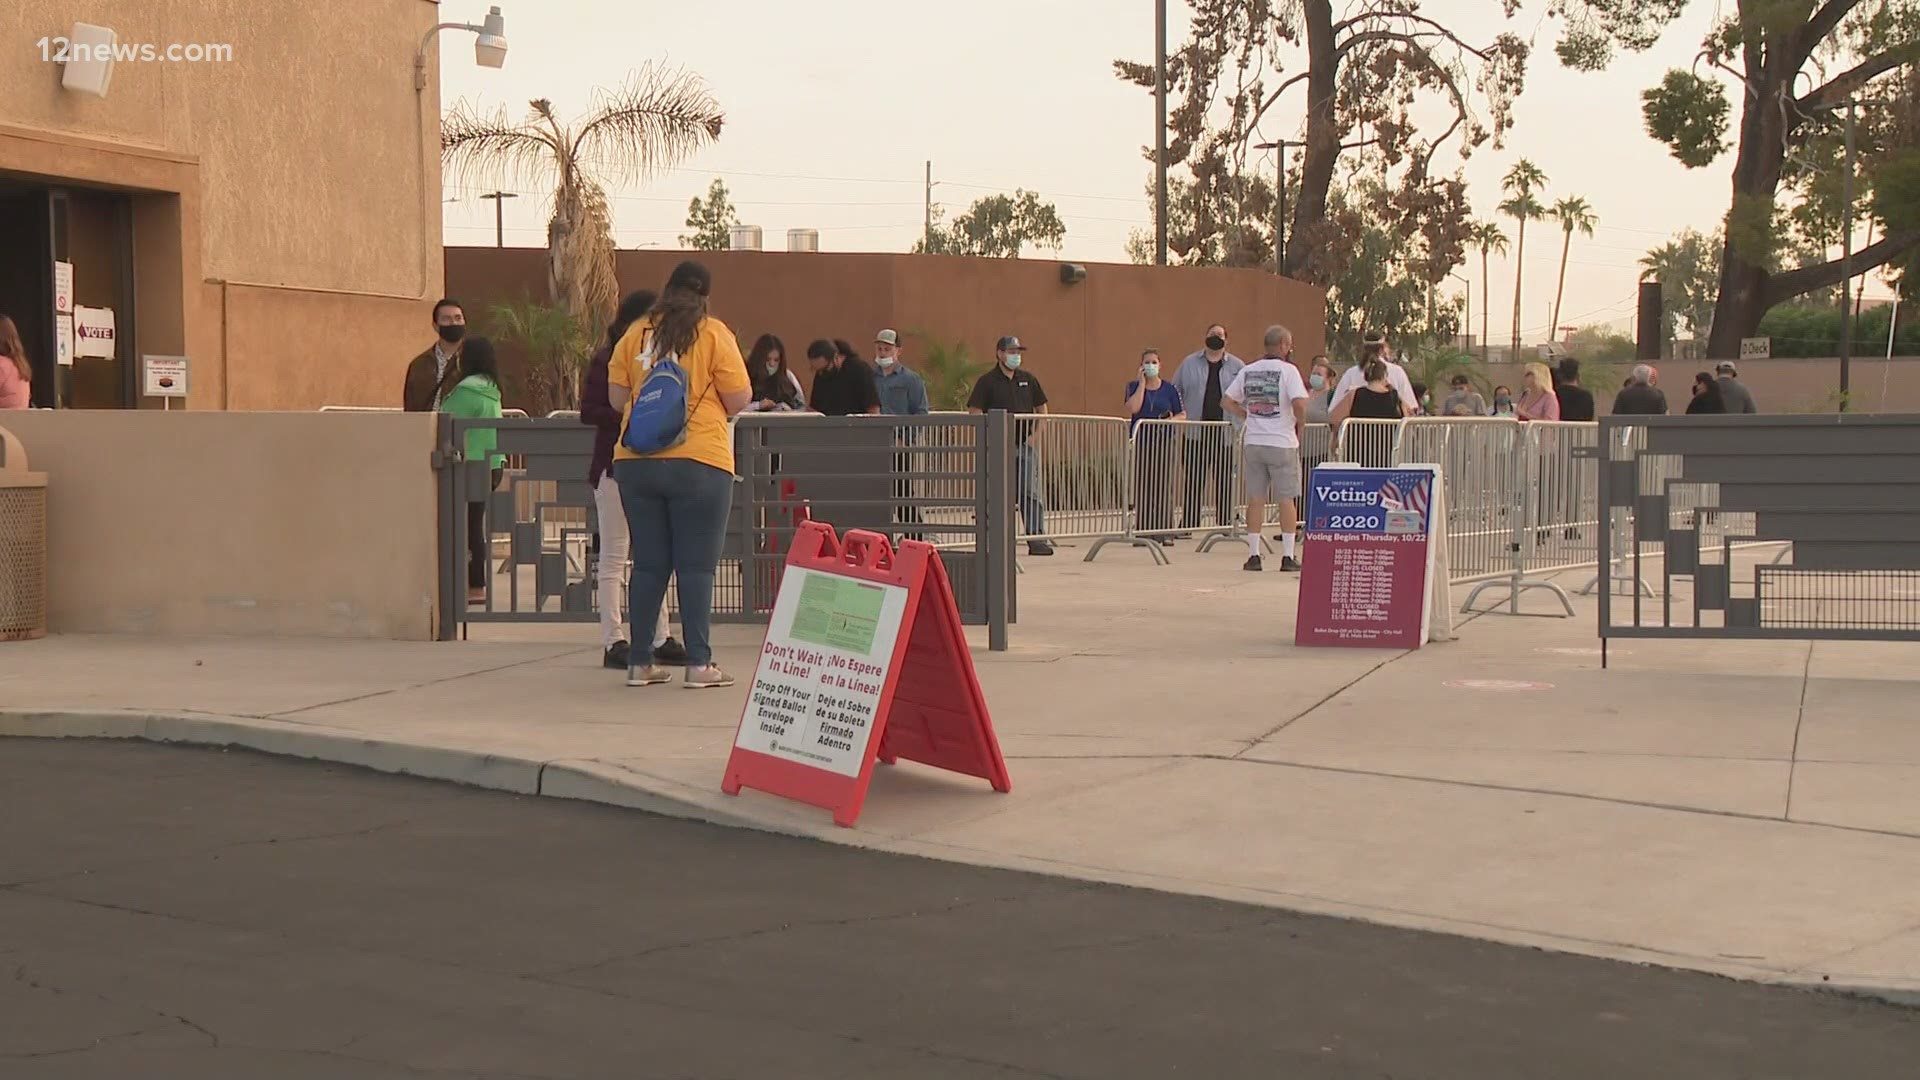 Election Day is here and in-person voting is well underway in Arizona. Team 12 has the latest updates from polling locations in the Phoenix area.